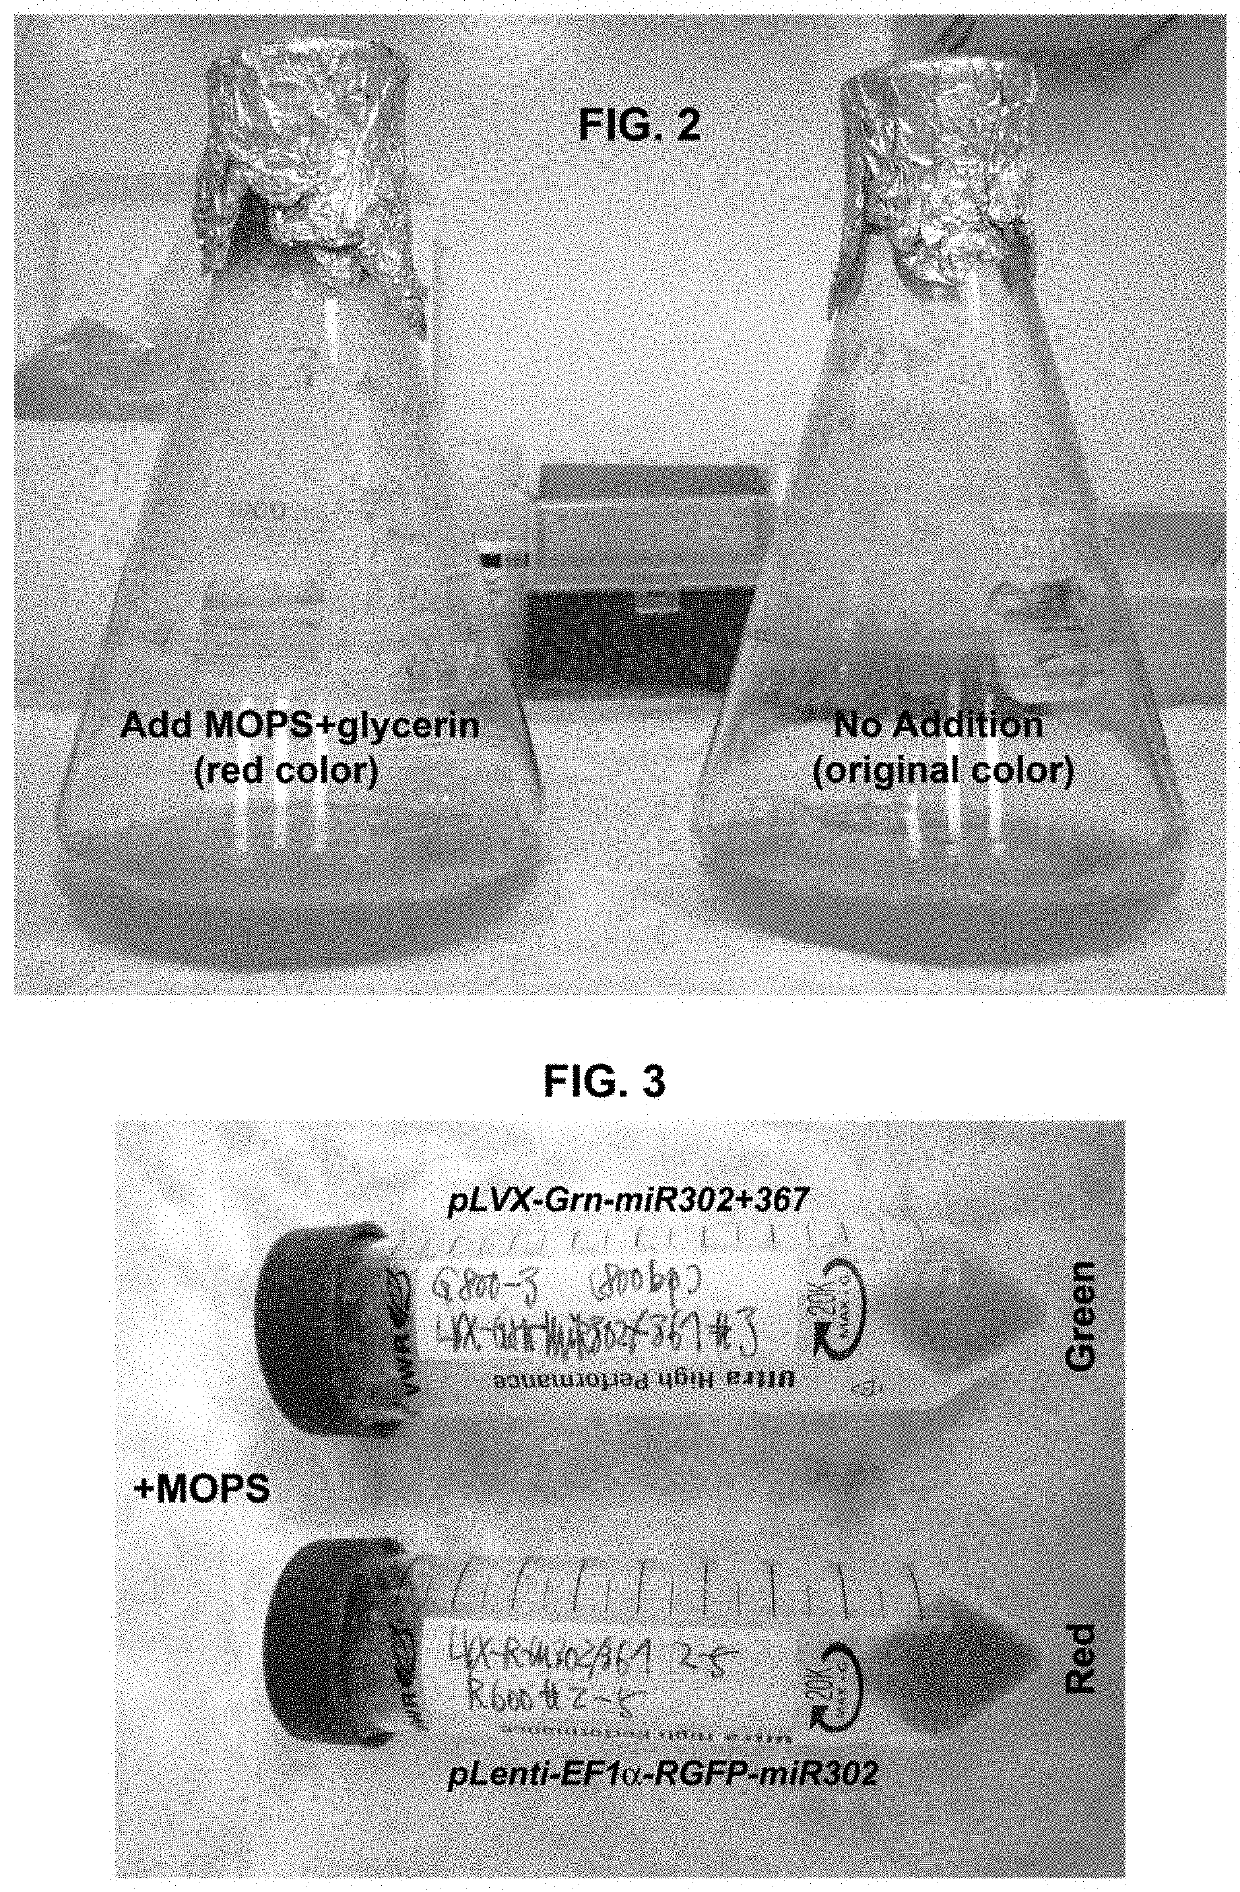 A composition and method of using mir-302 precursors as Anti-cancer drugs for treating human lung cancer